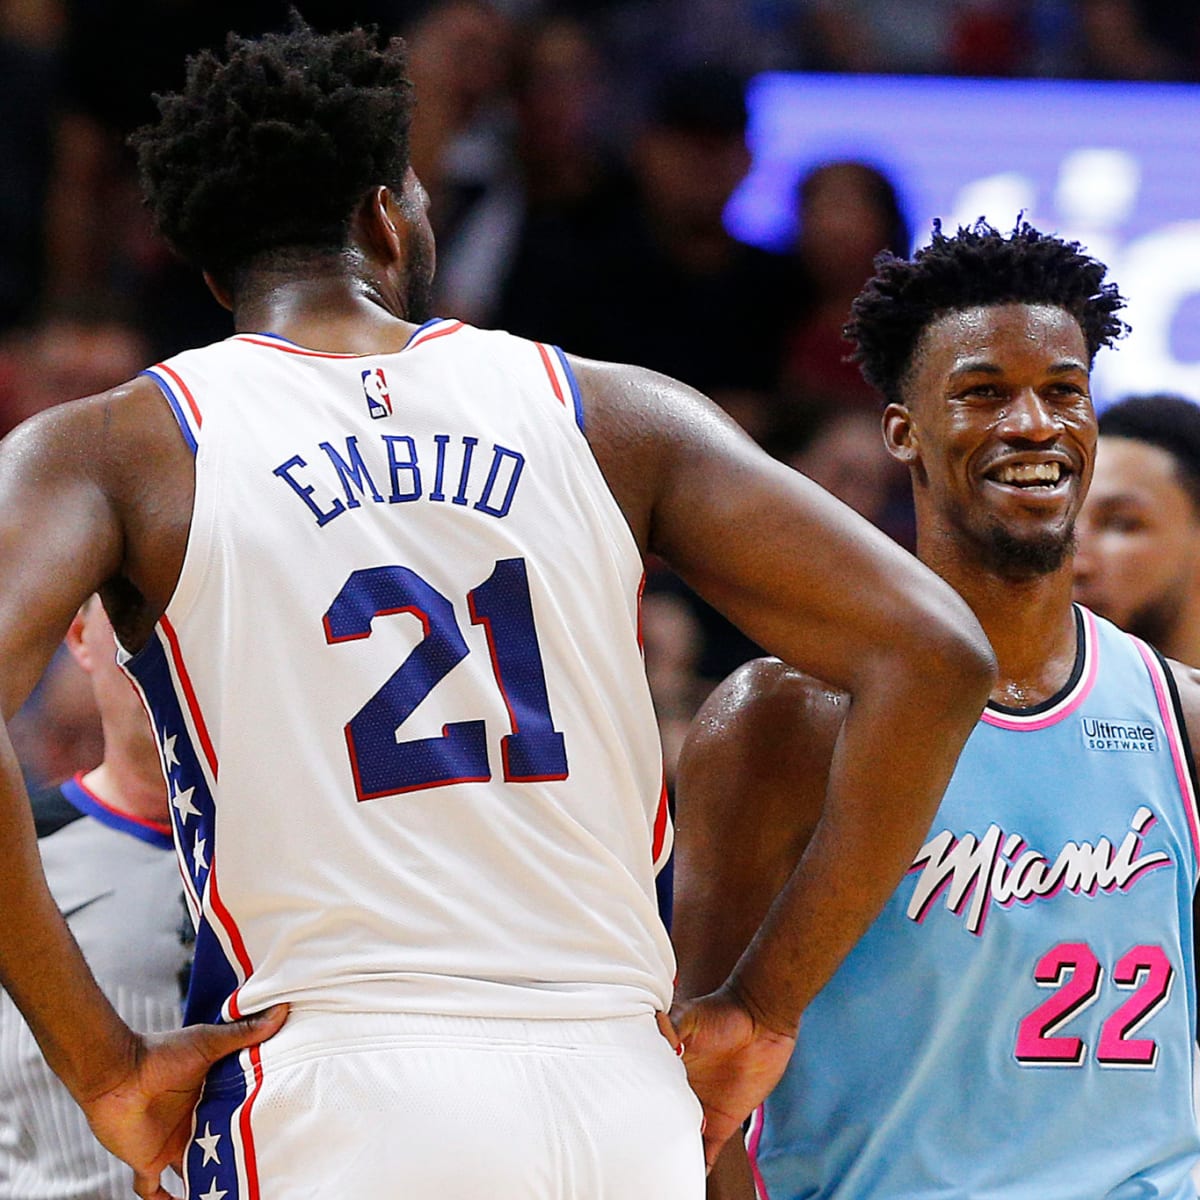 Joel Embiid concerned his Twitter use will backfire